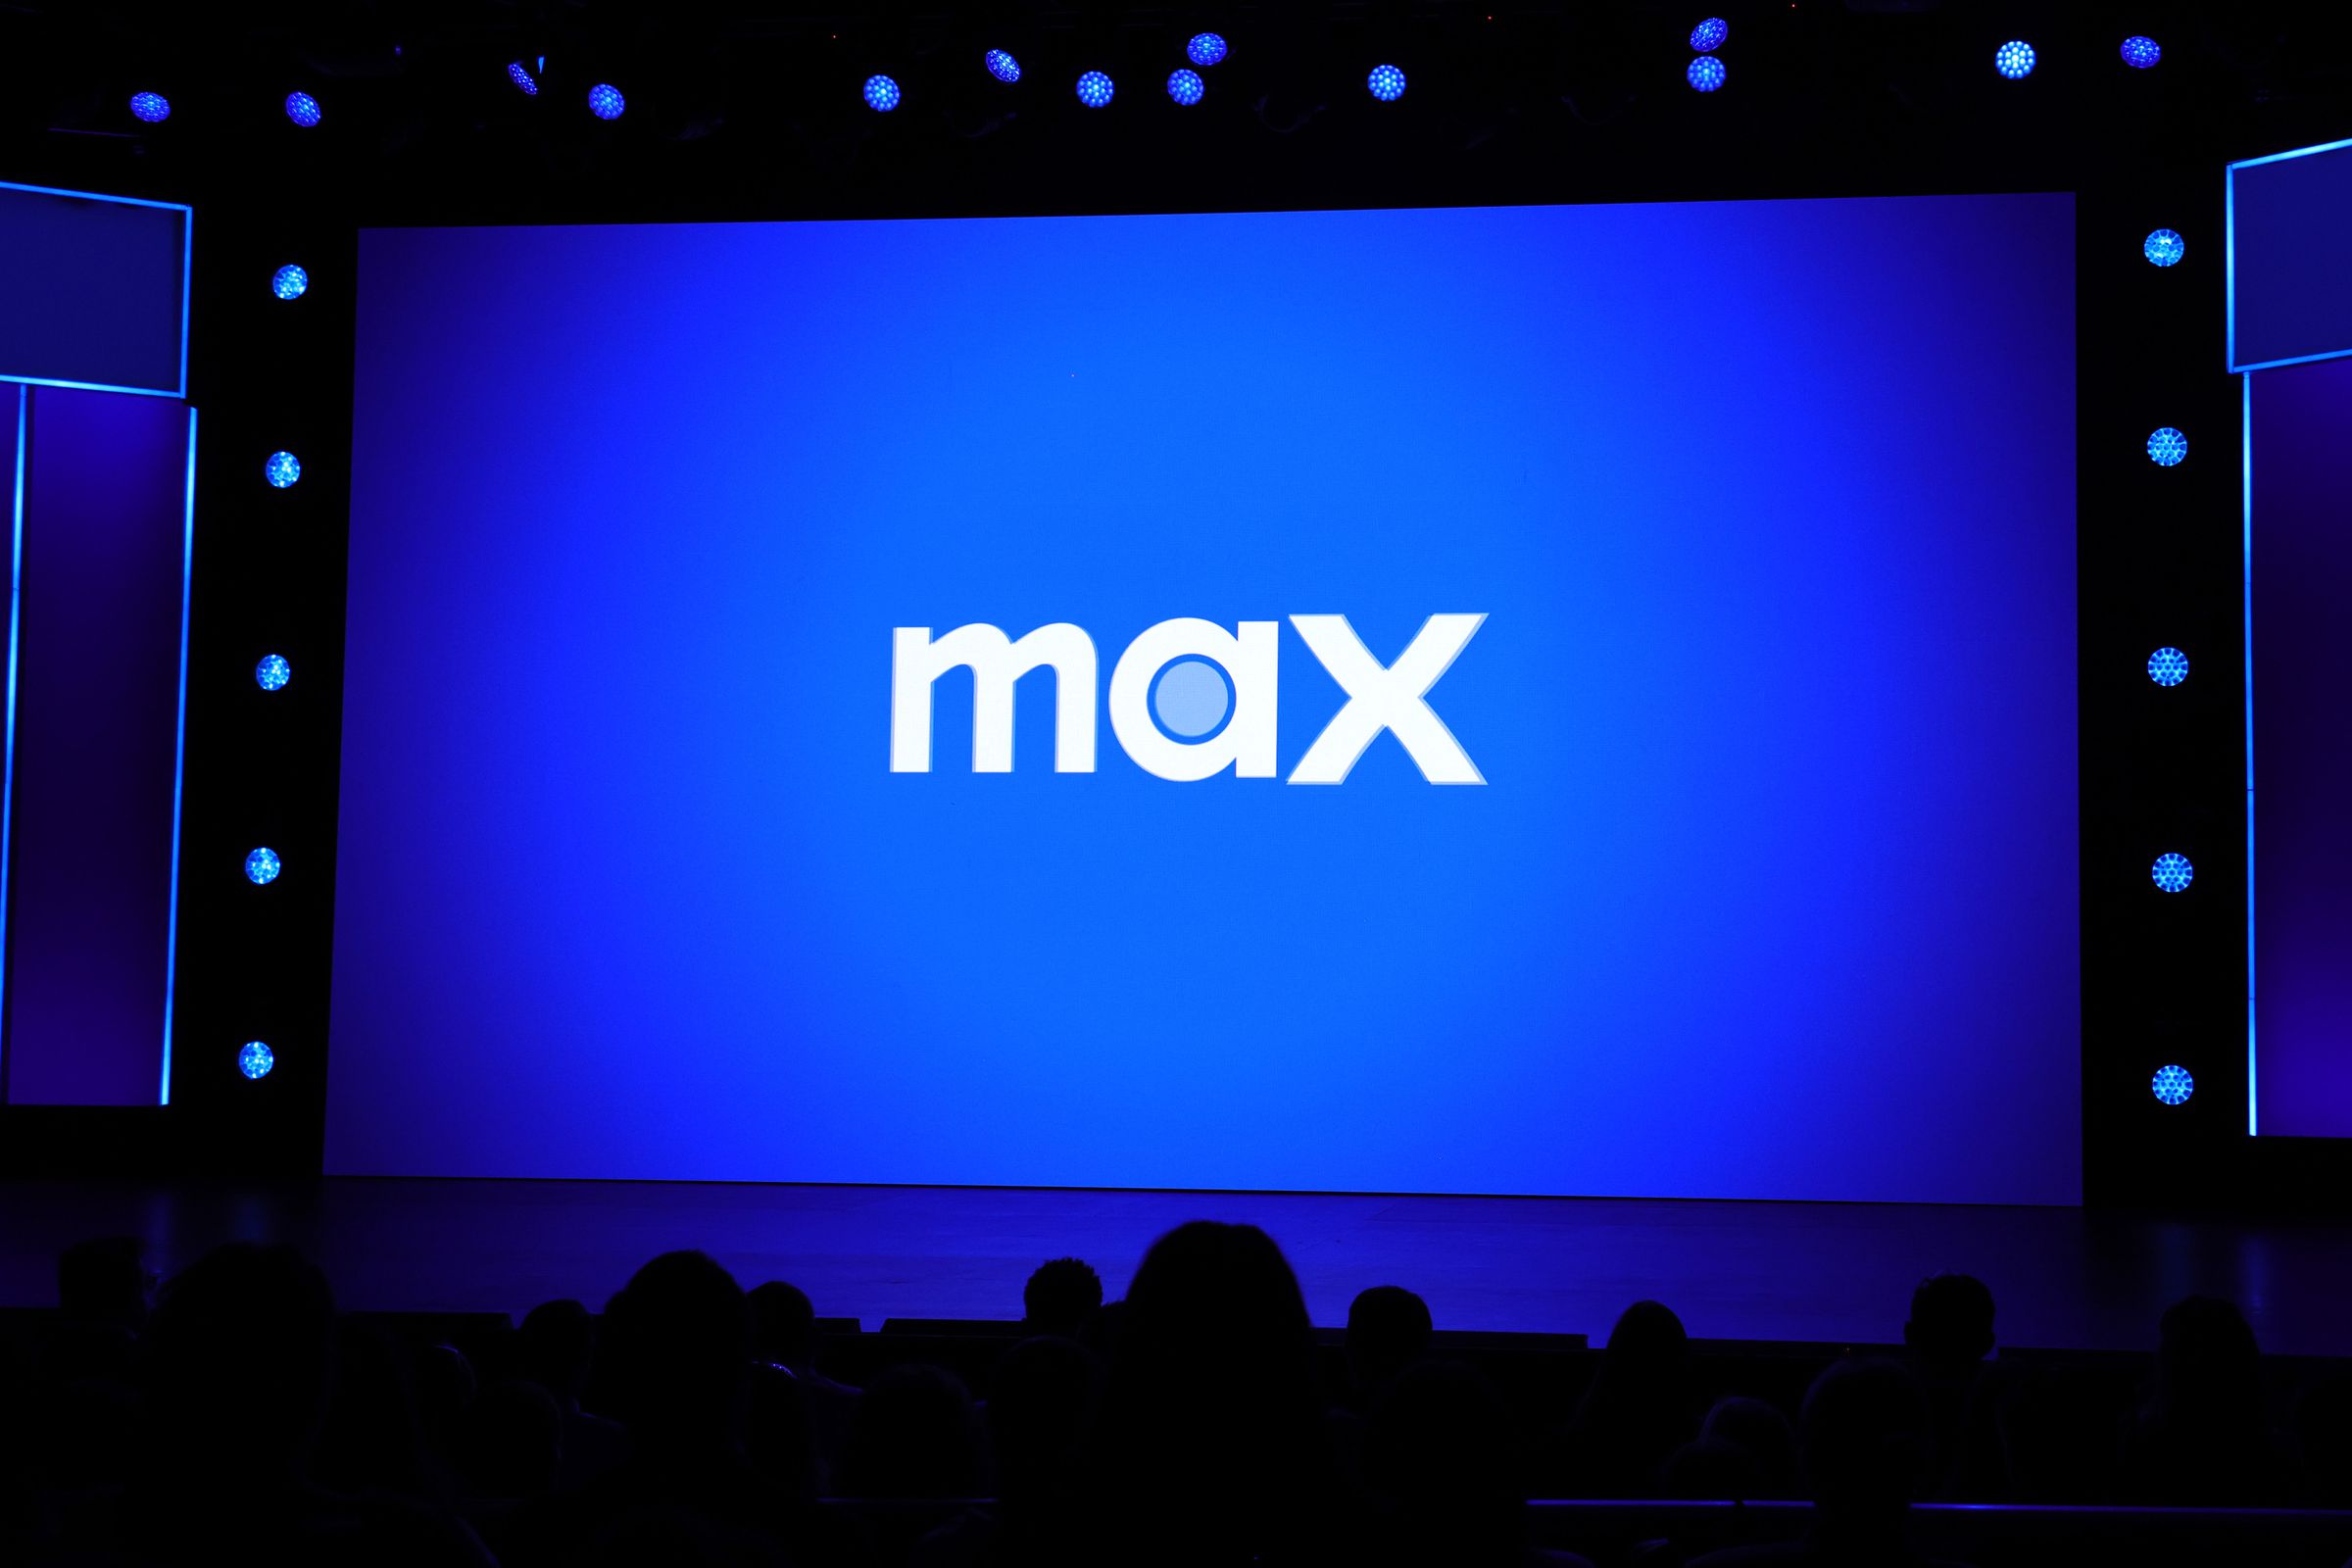 The Max logo being displayed on a massive screen before an audience.